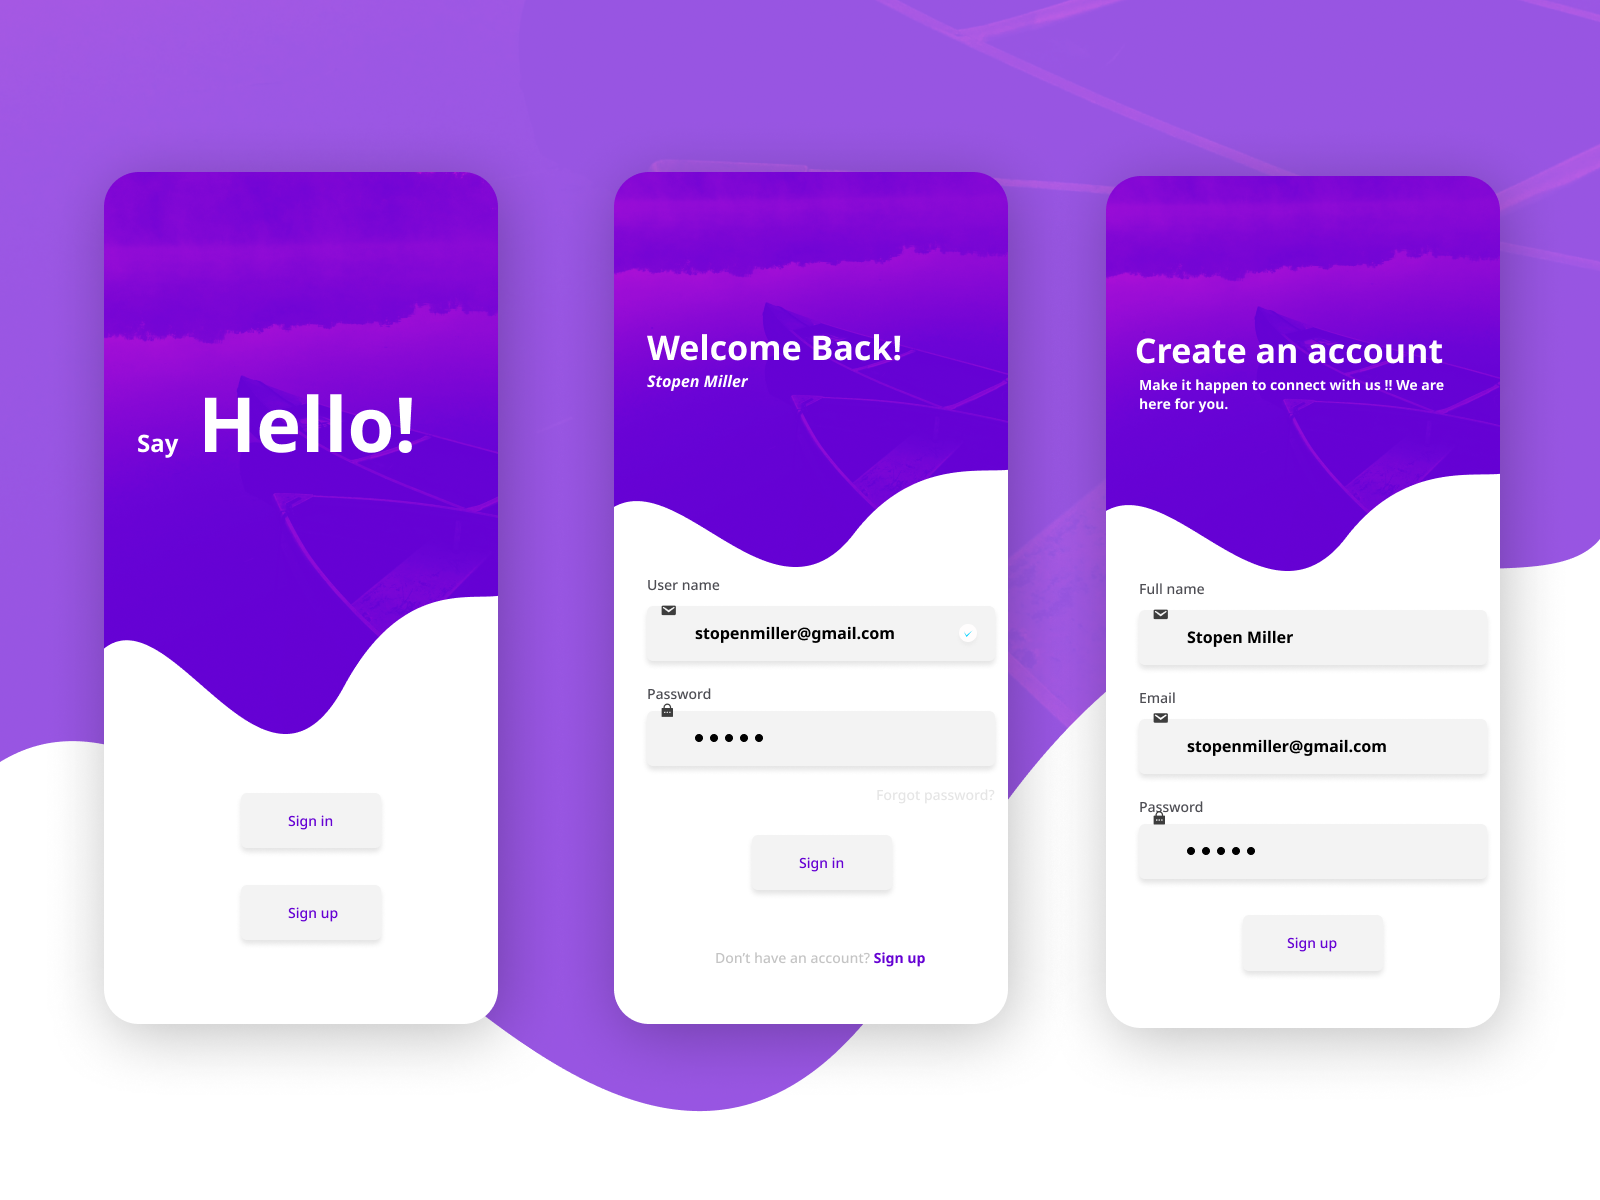 App sign up and sign in interface by Md Bellal on Dribbble